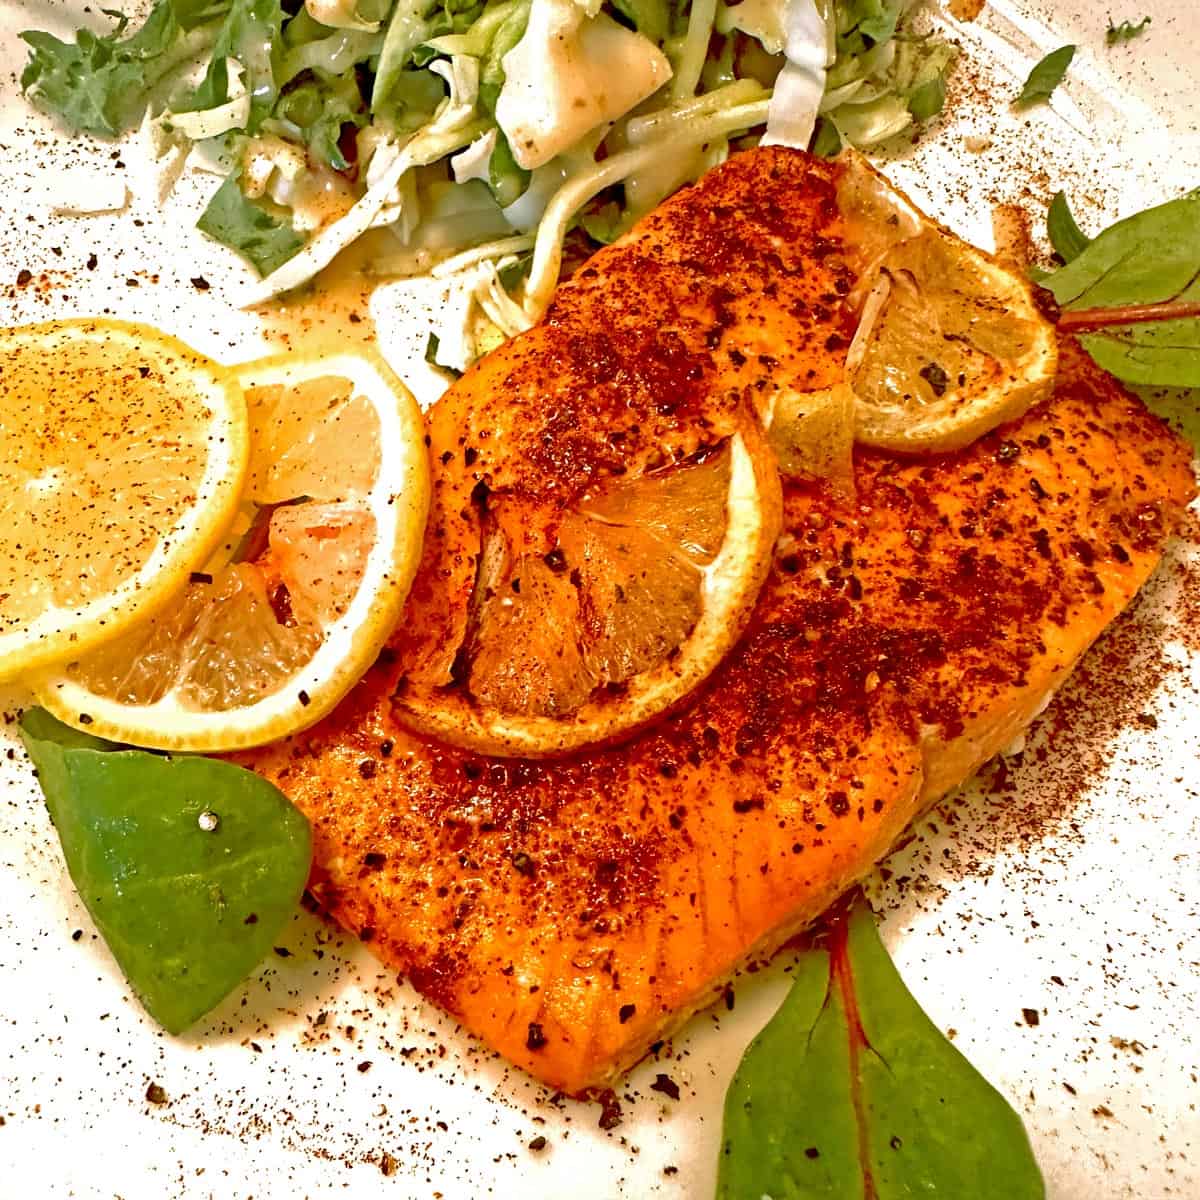 A piece of salmon on a white plate with lemon garnish.